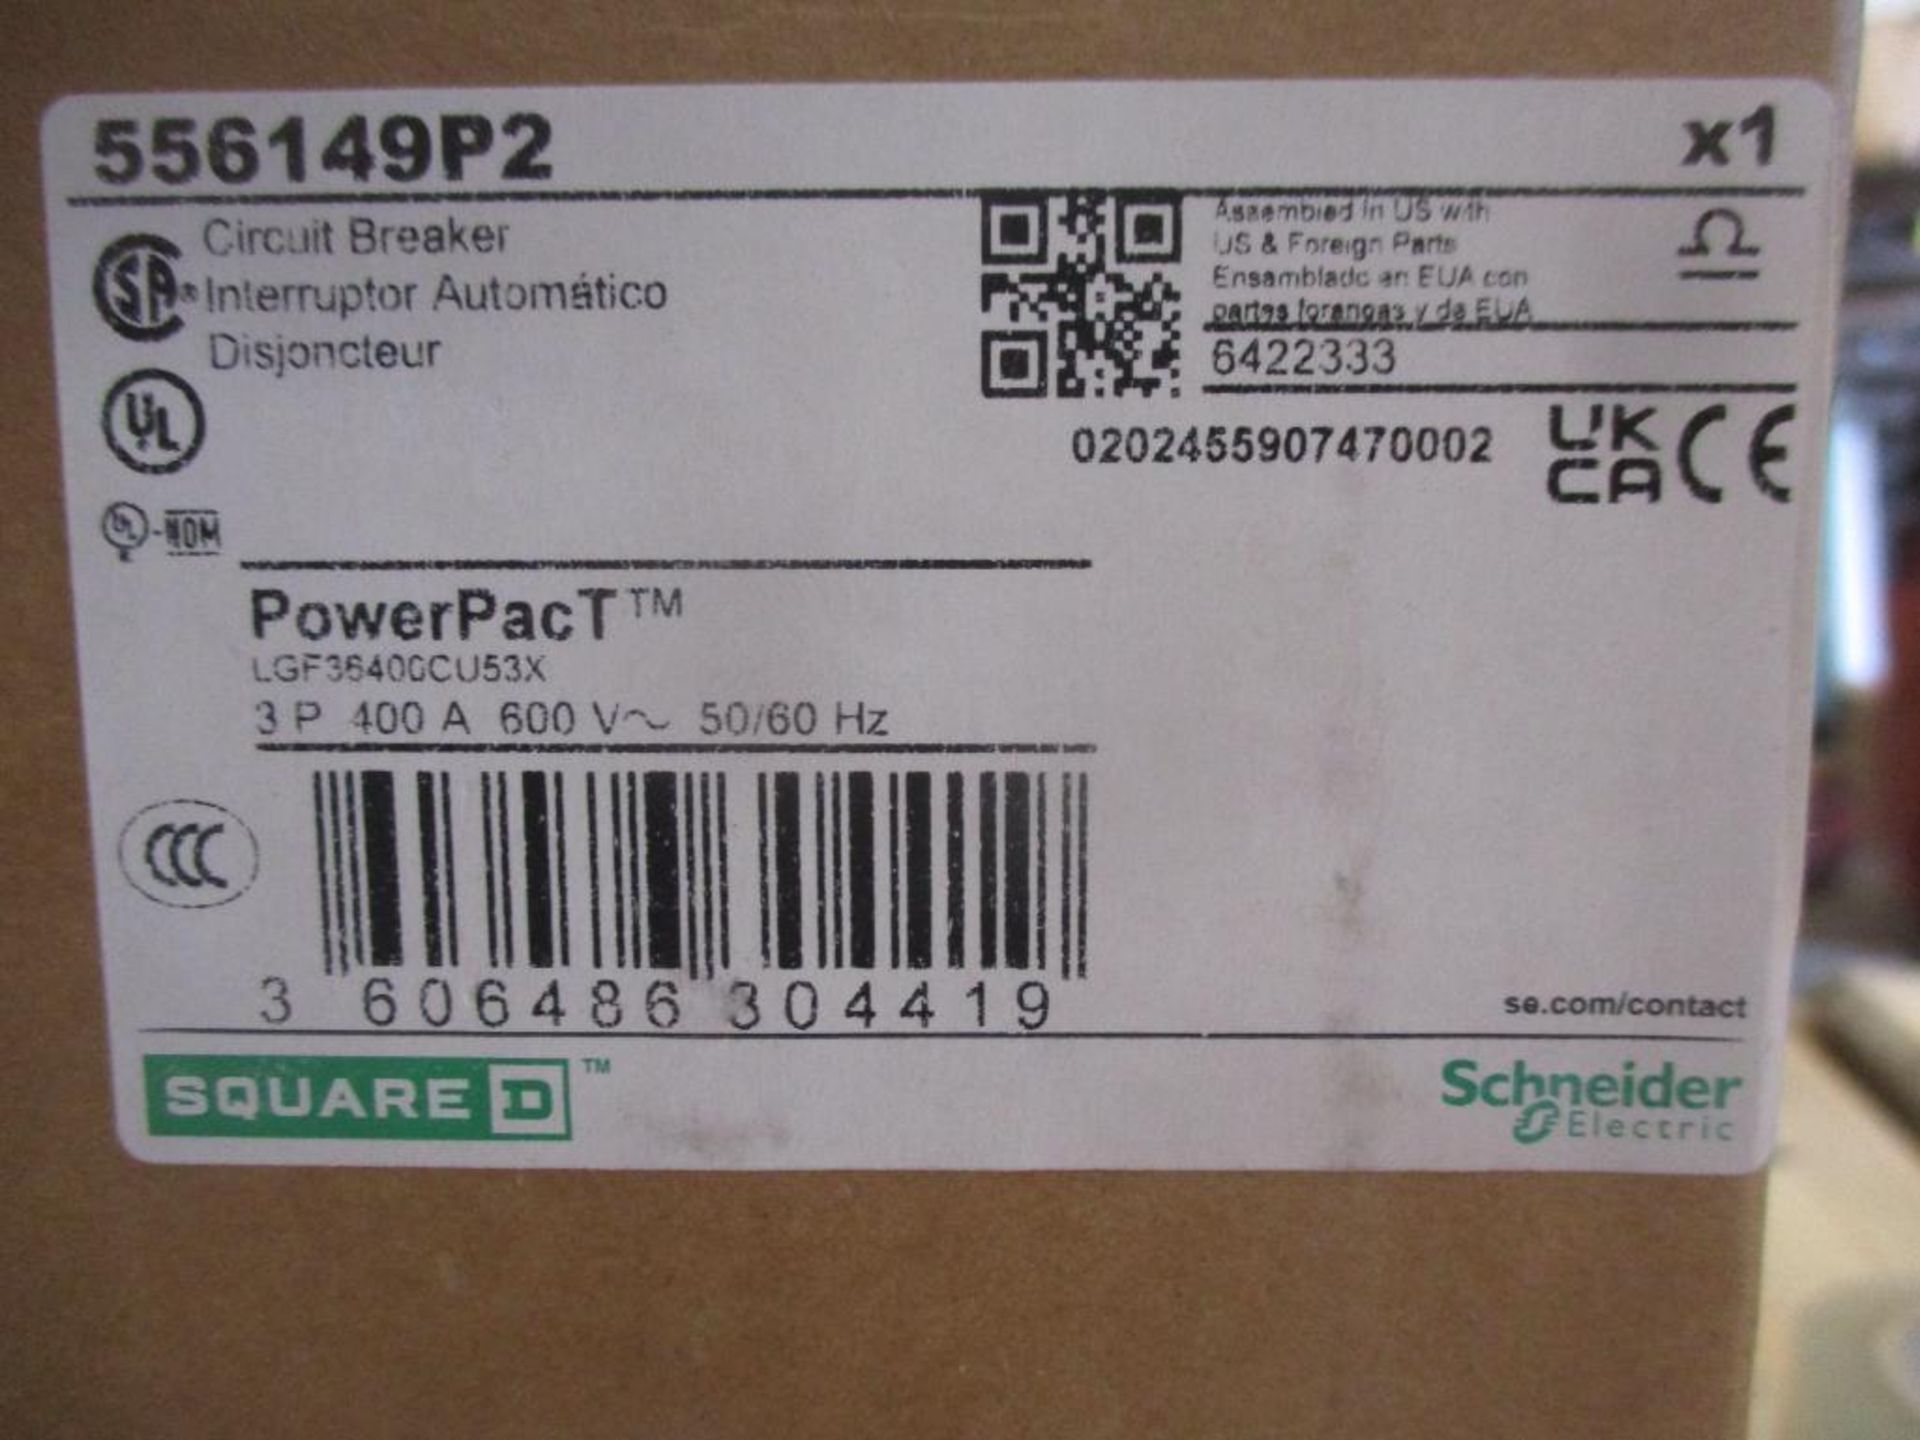 Square D 400 AMP Circuit Breaker, 556149P2, 3P, 400A, 600VAC, PowerPacT LG 400 (New in Box) - Image 4 of 4